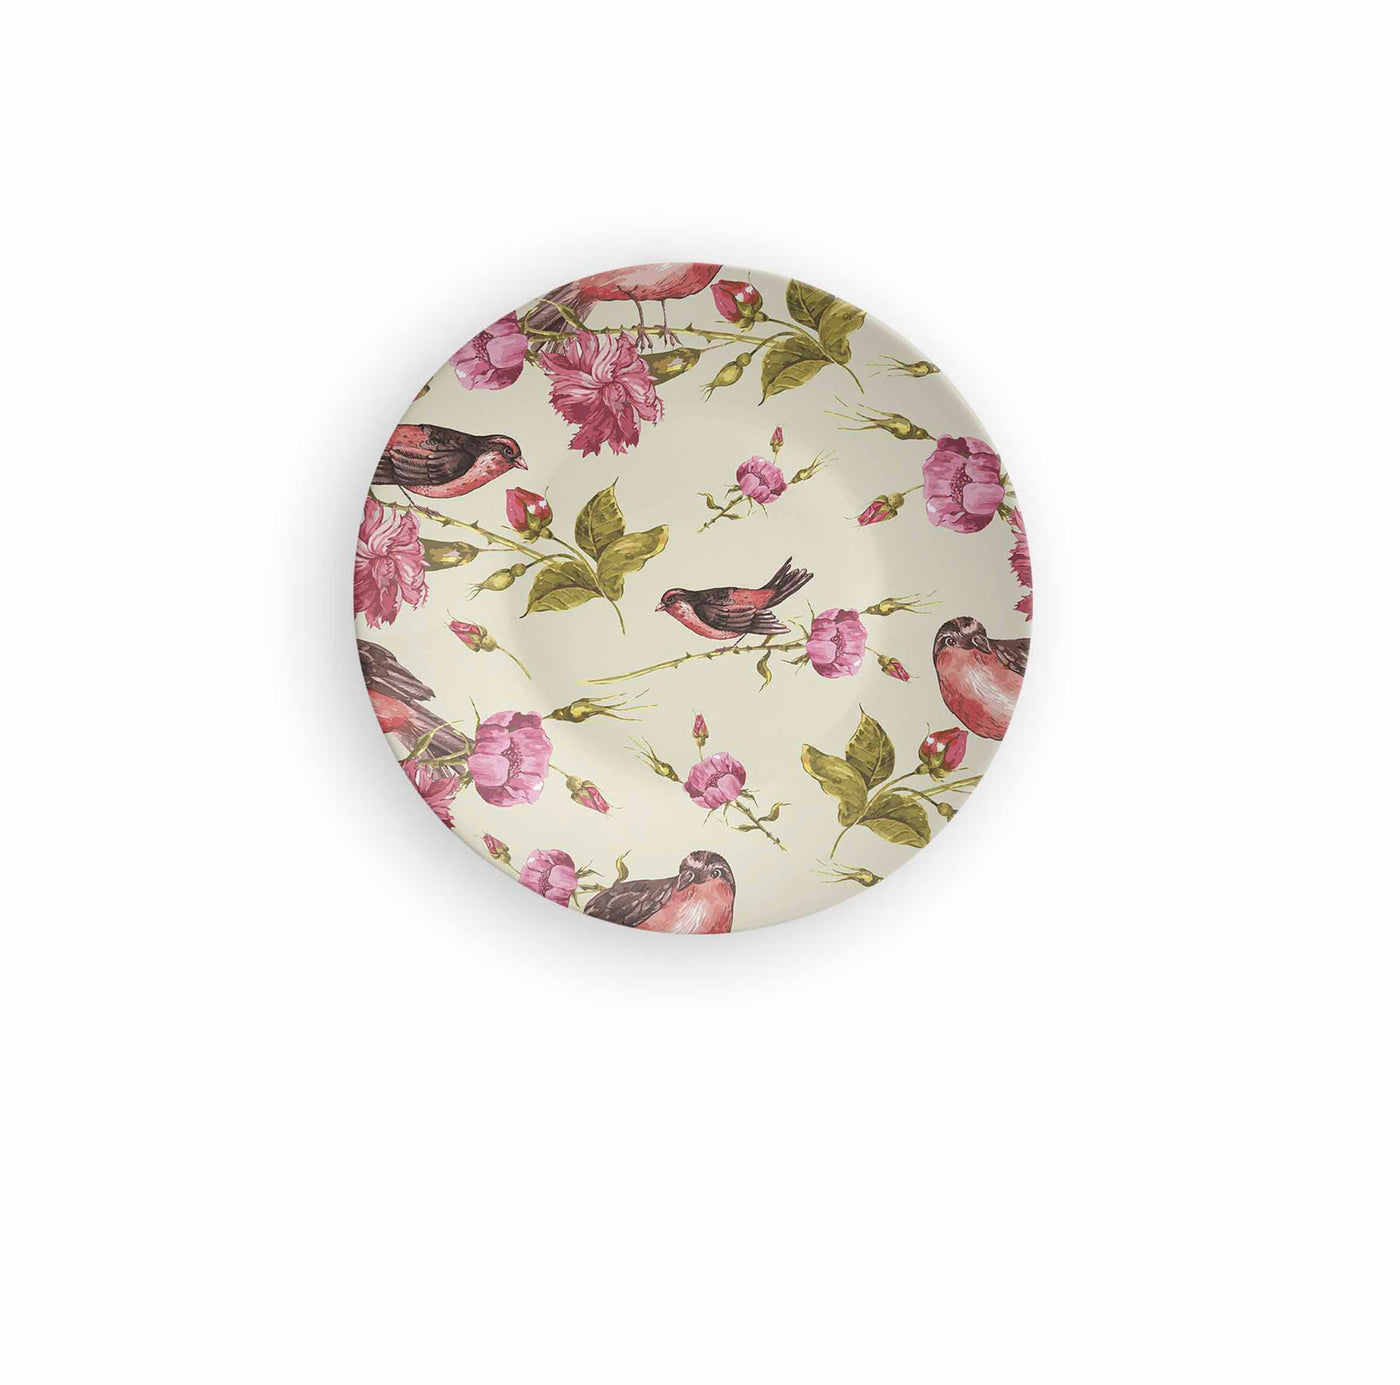 Birds of the Hour Decorative Wall Plate - Wall Decor - 2